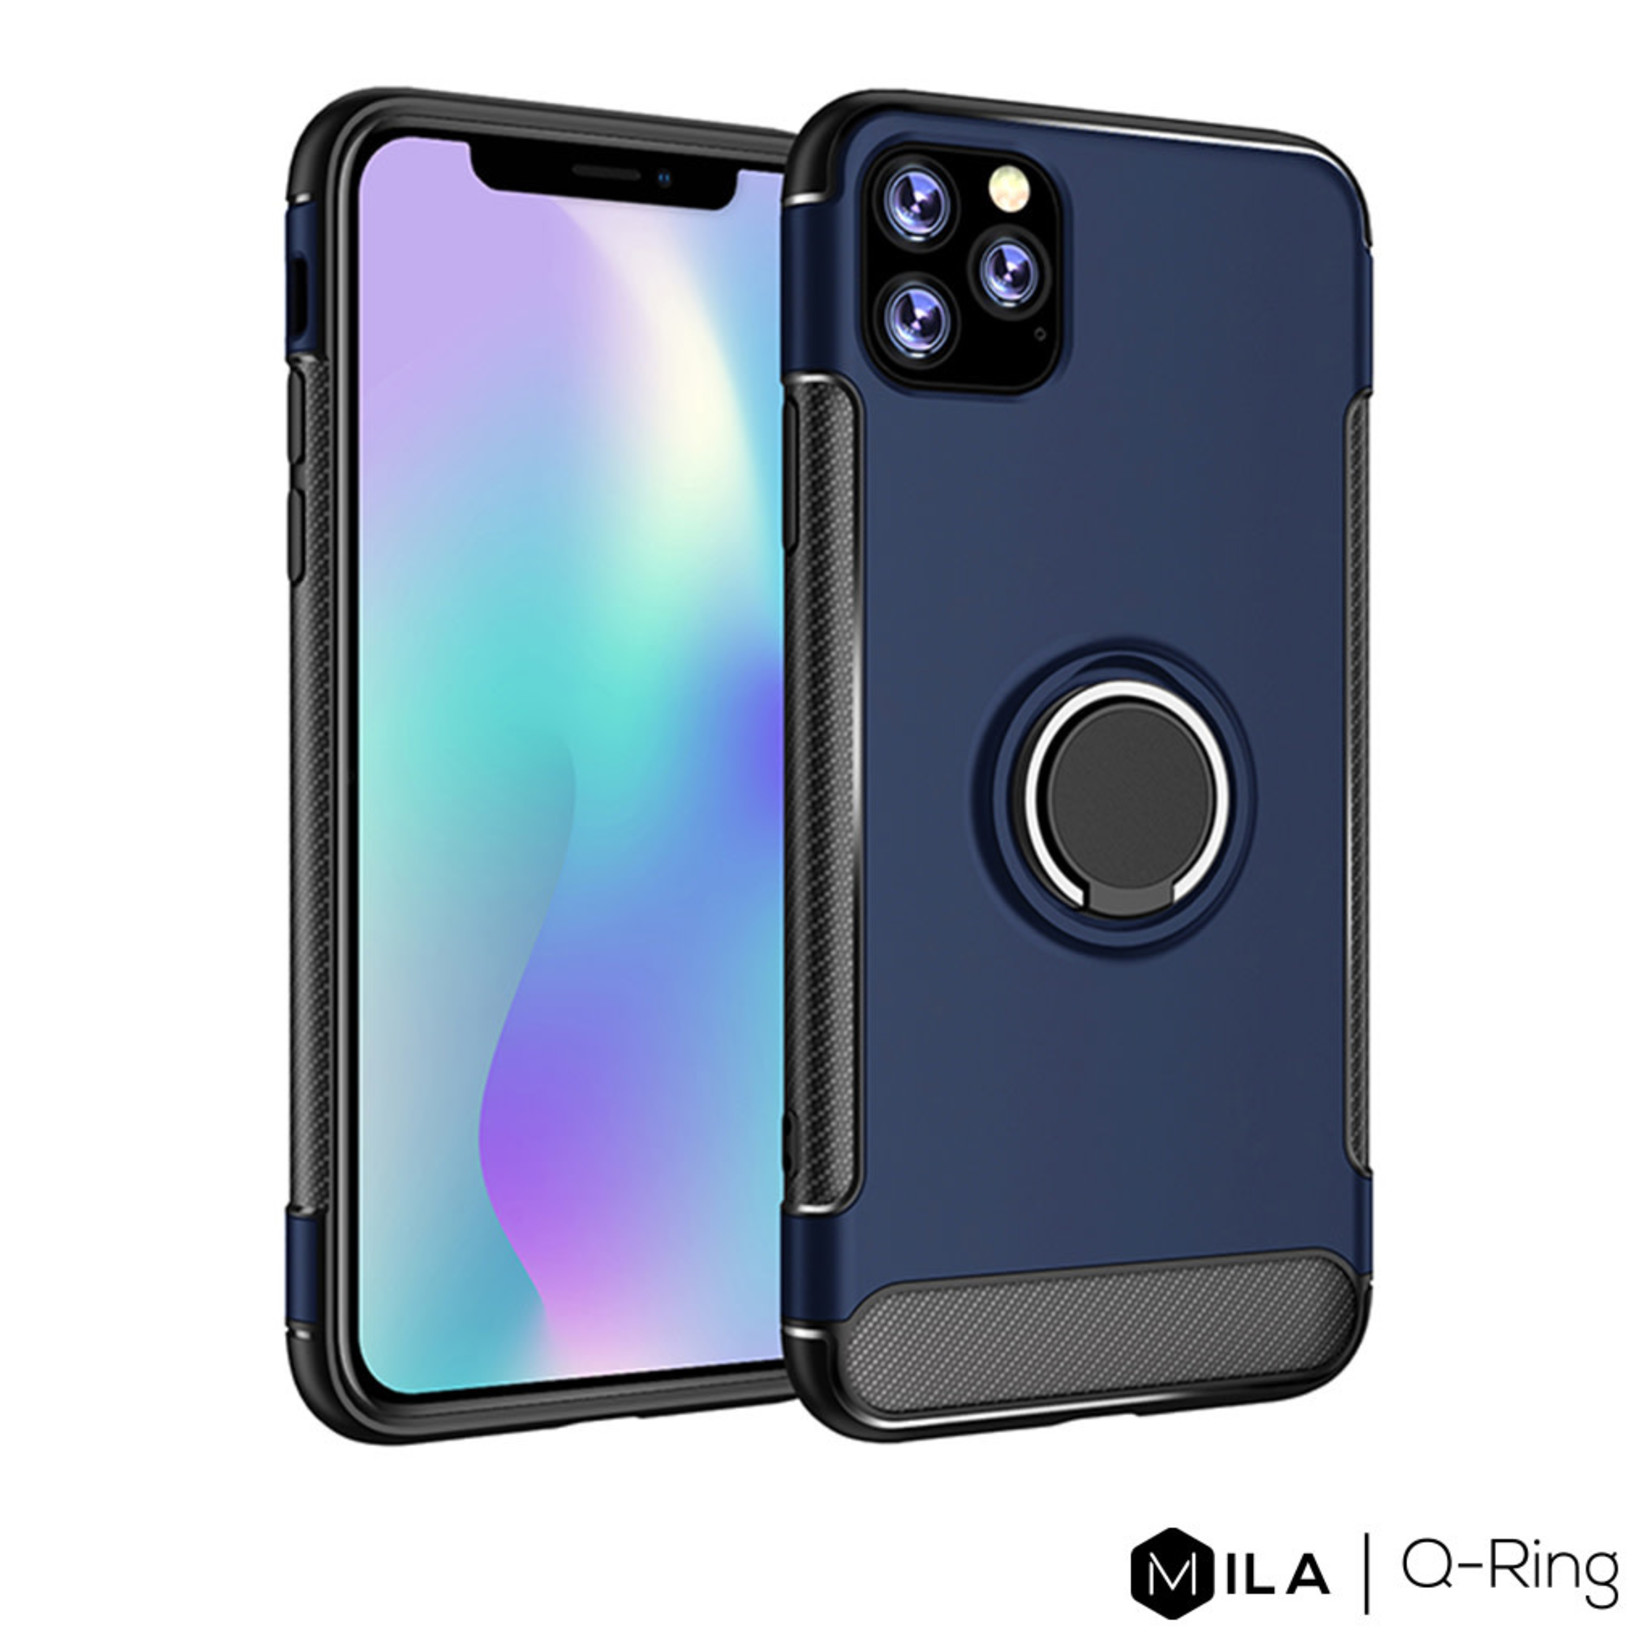 MILA | Q-Ring Case for iPhone 11 Pro